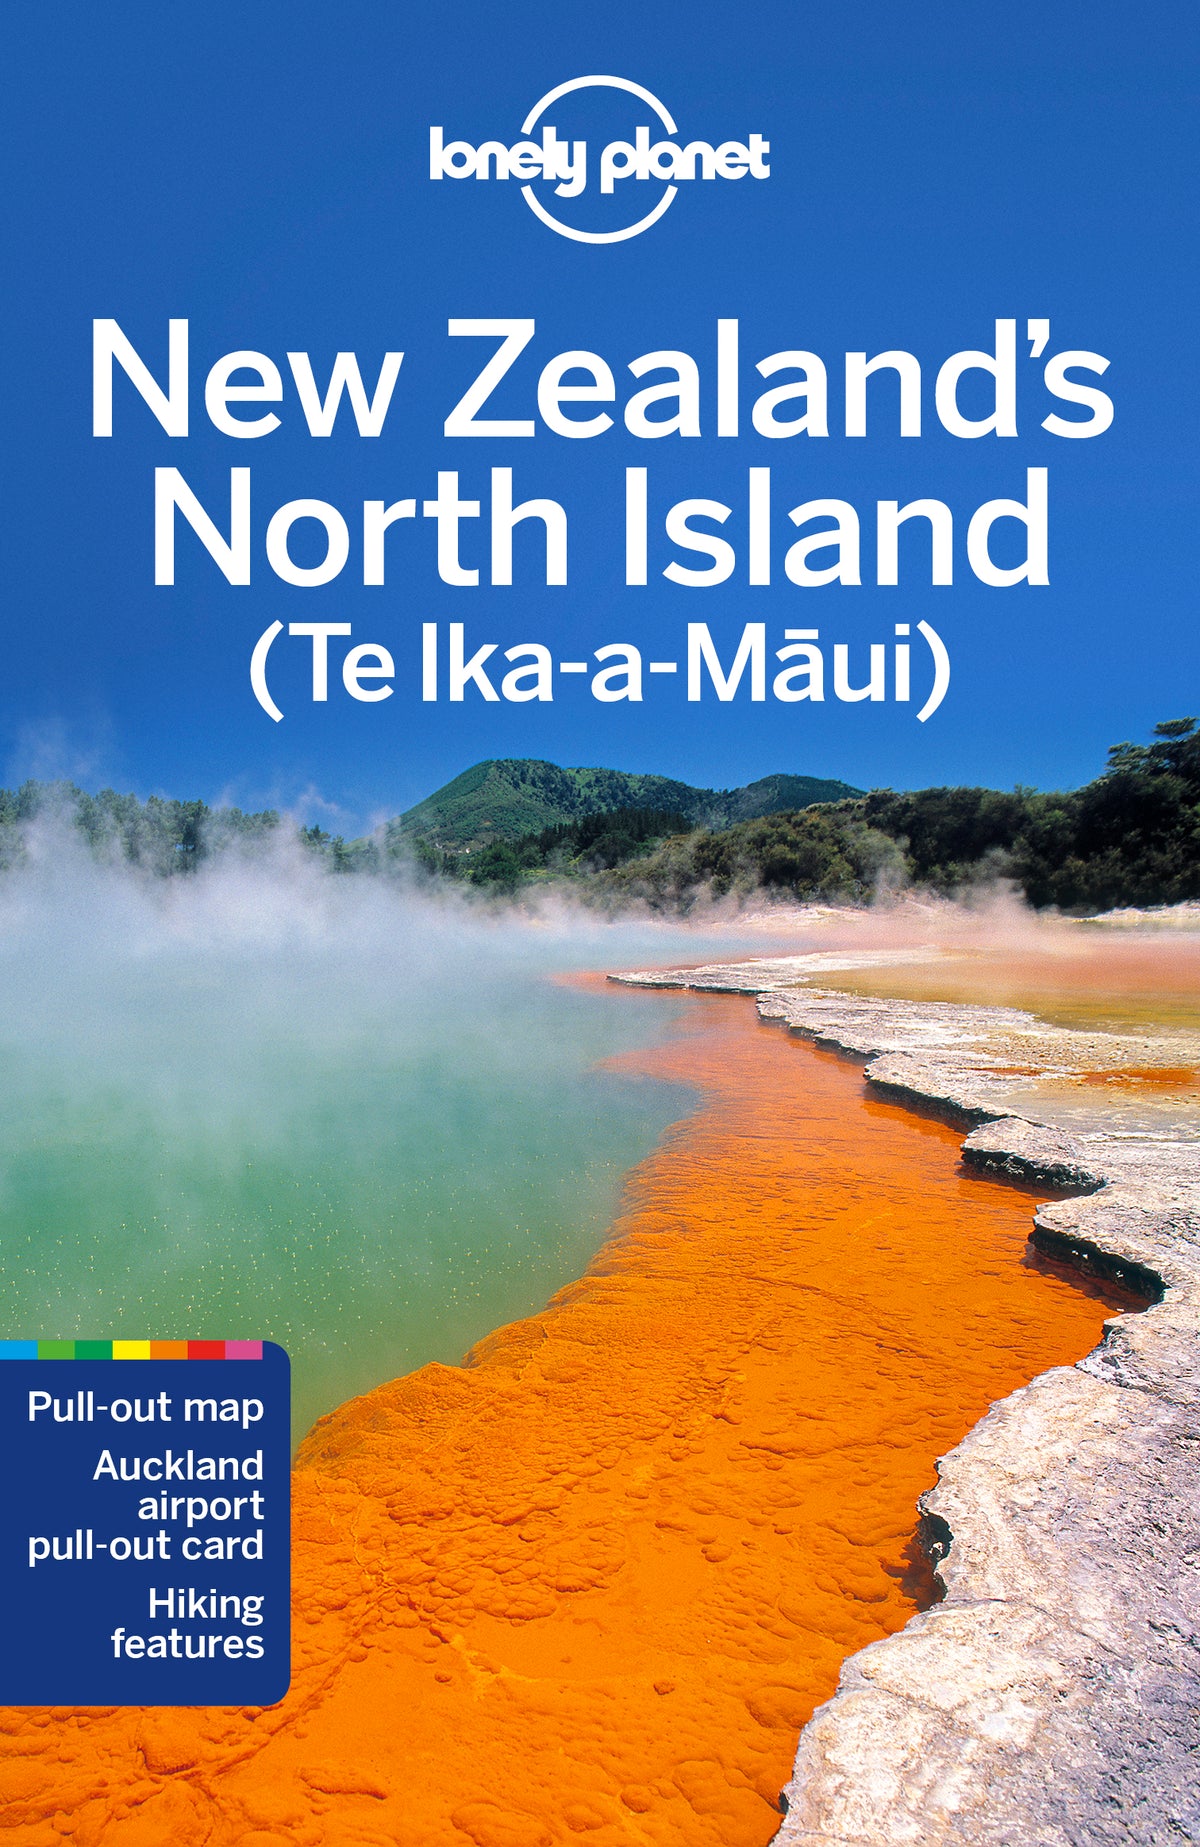 New Zealand's North Island Travel Guide